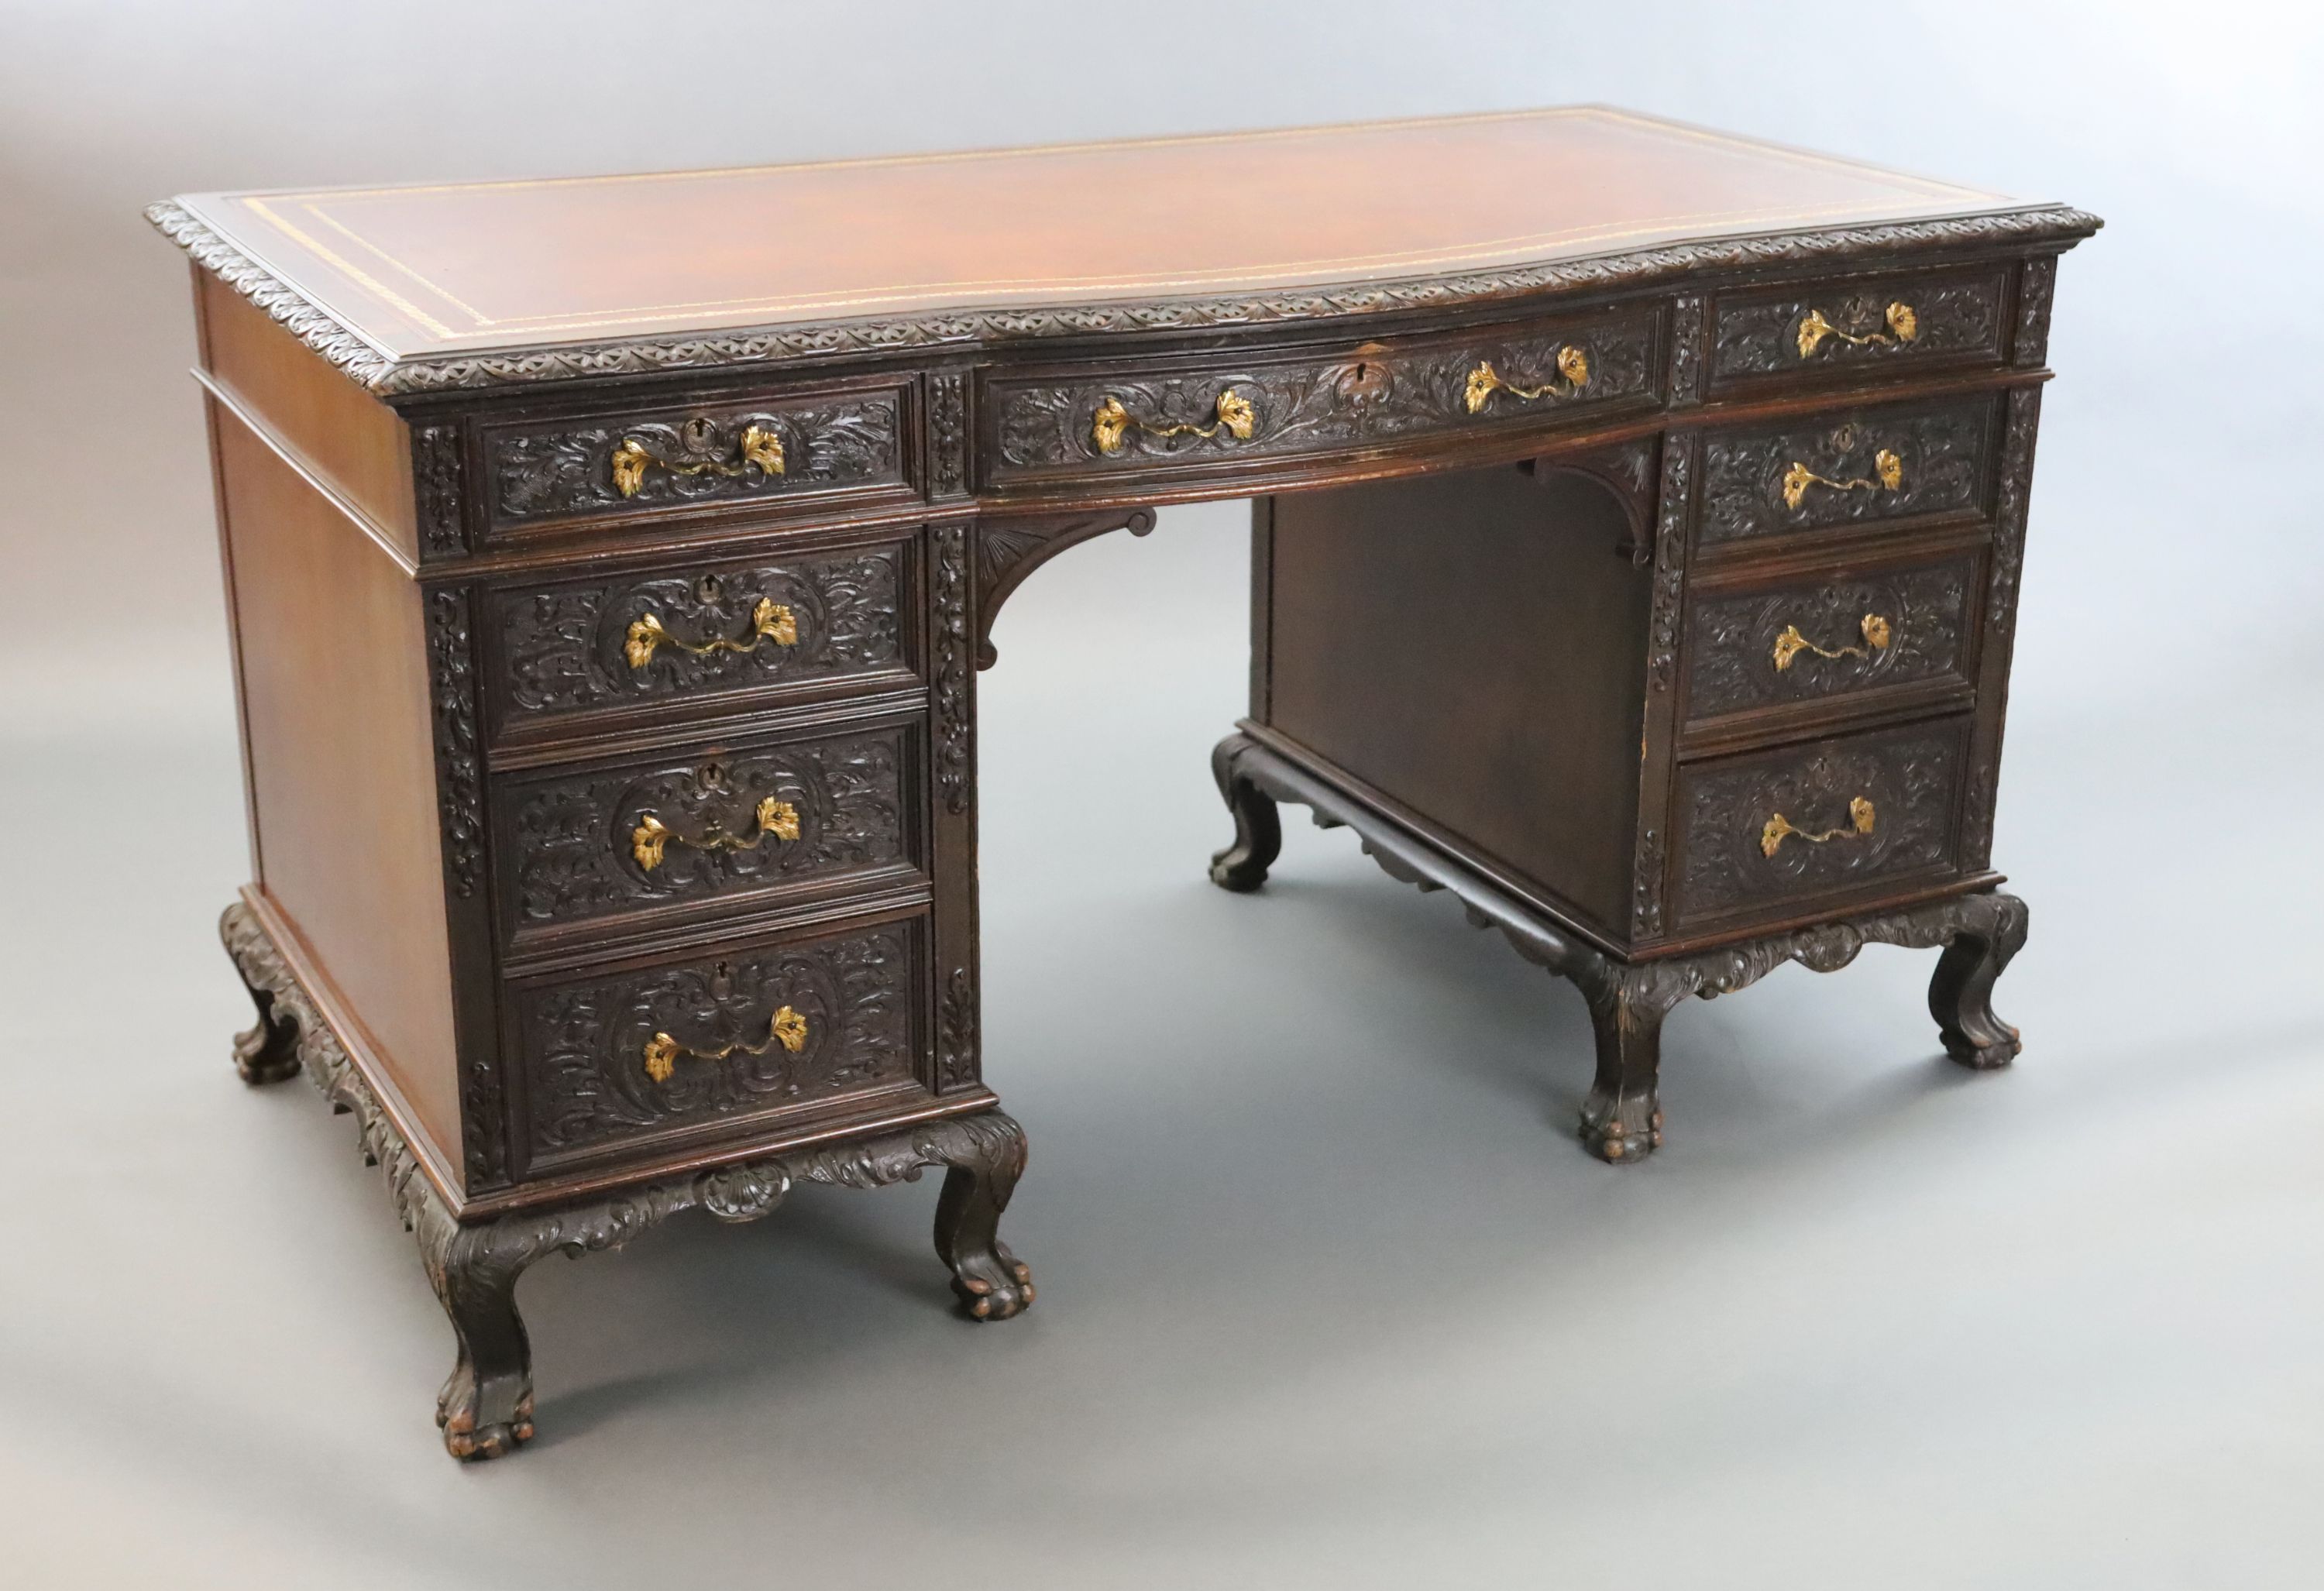 An Edwardian foliate carved mahogany serpentine kneehole desk, W.4ft 6in. D.2ft 5in. H.2ft 6in.